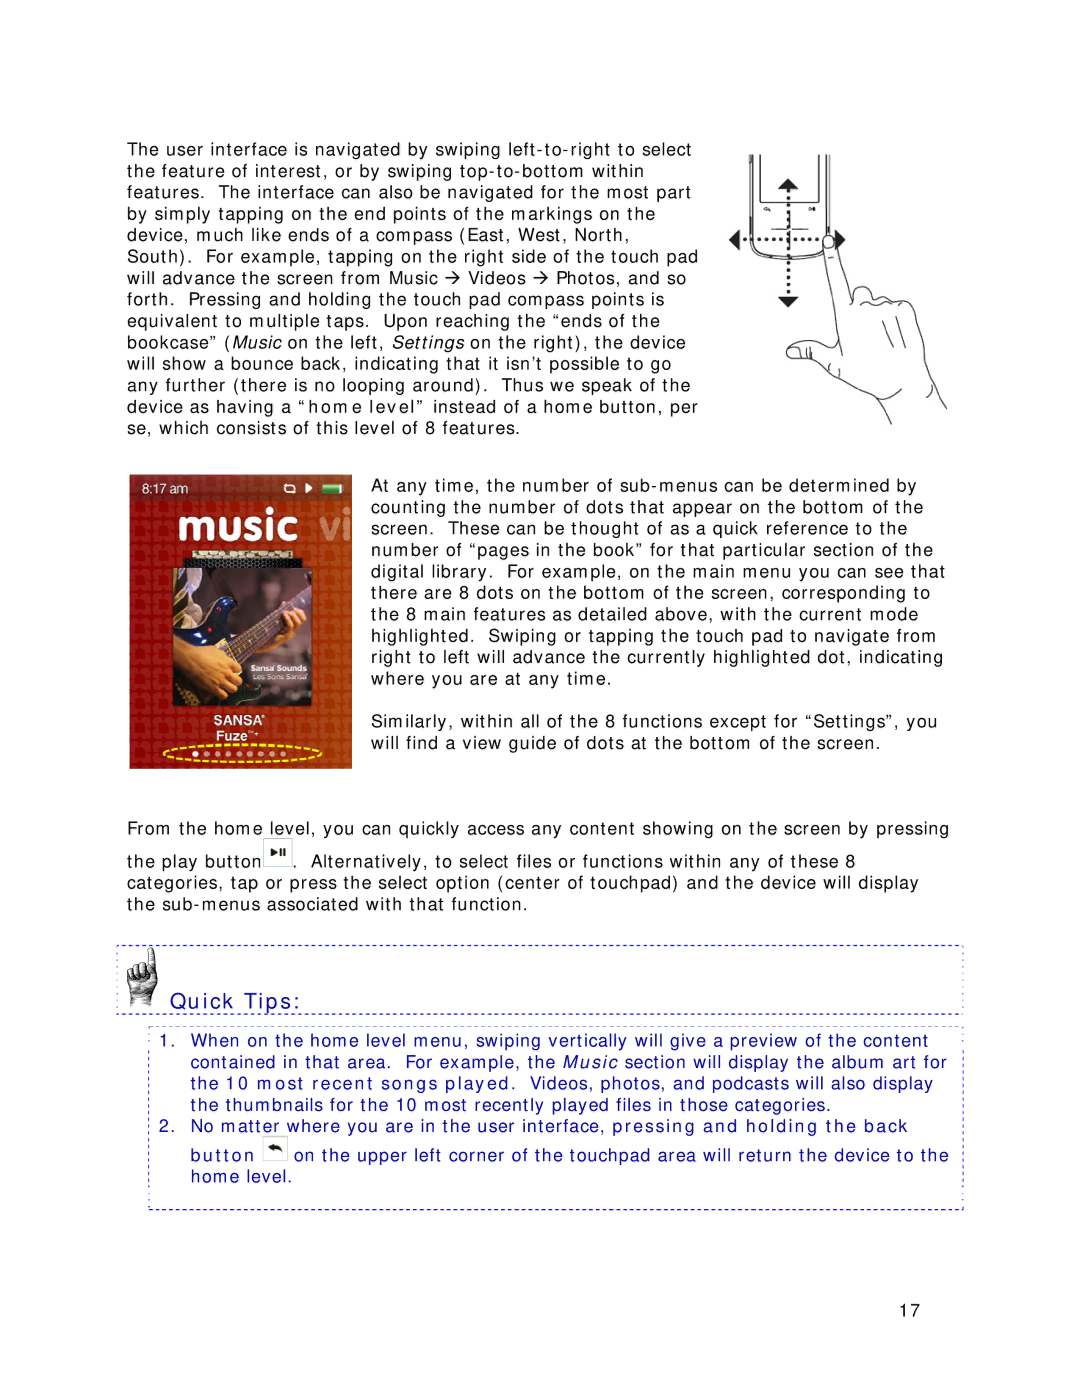 SanDisk MP3 Player manual Quick Tips 